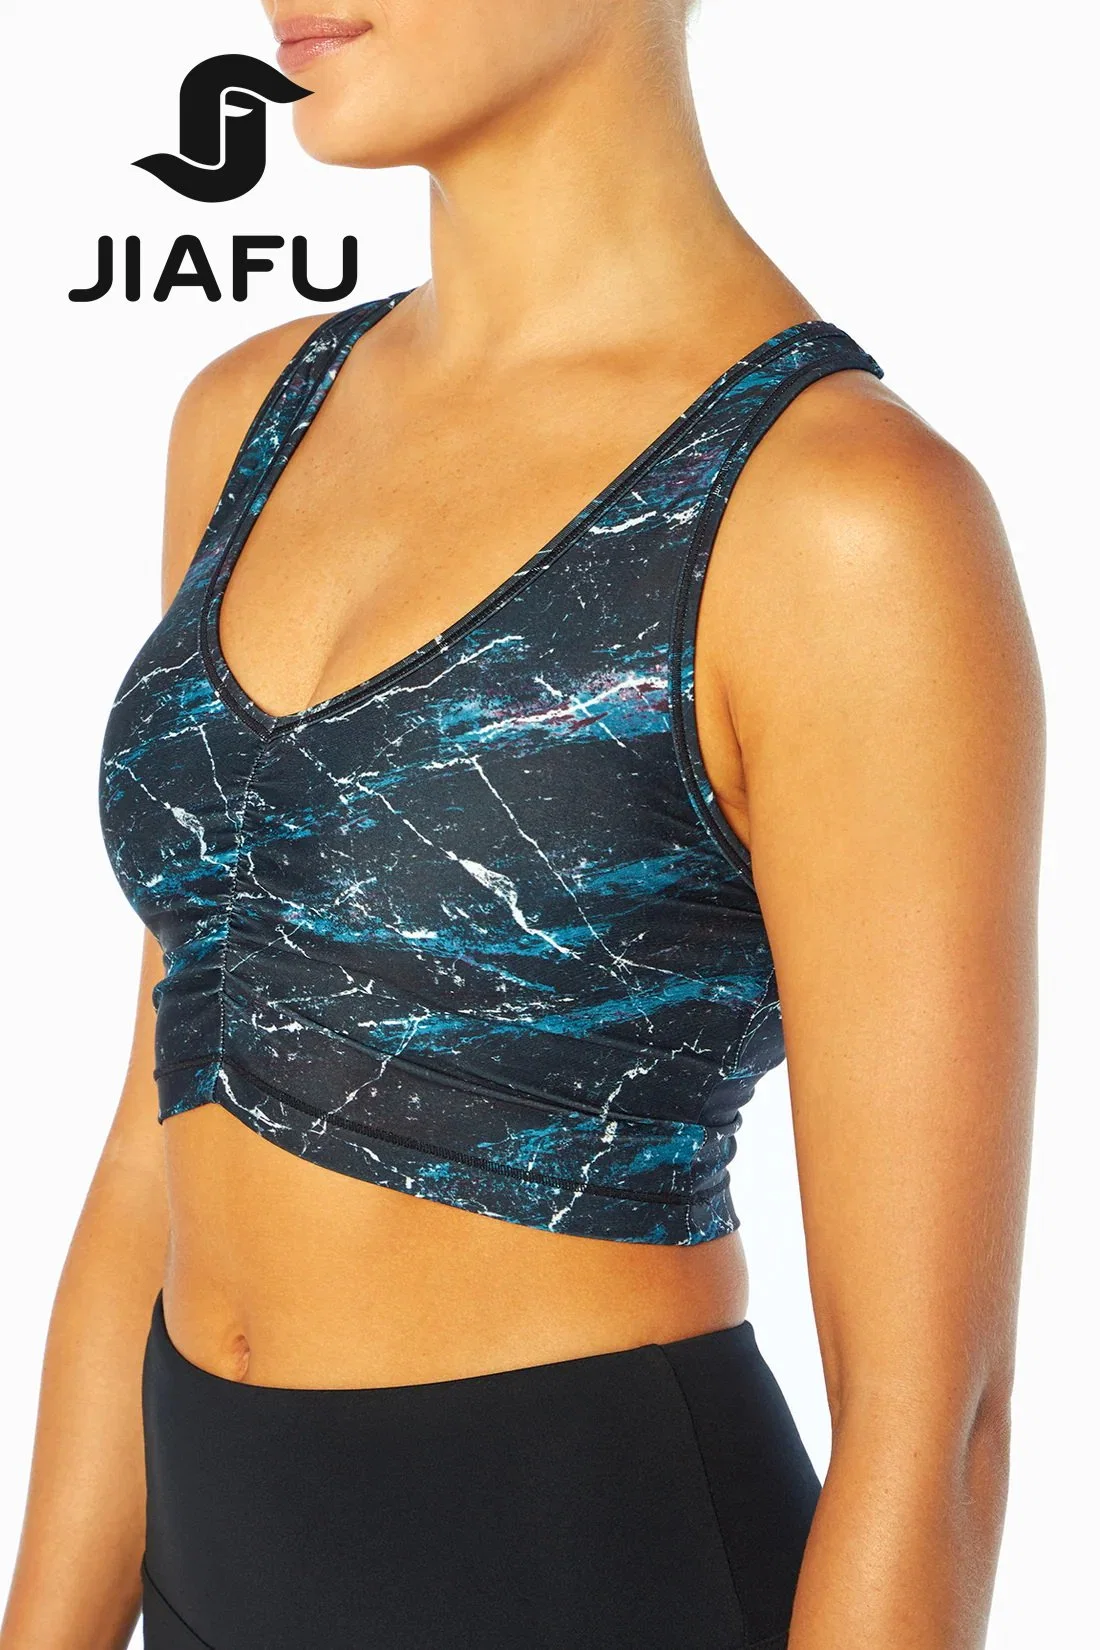 Moisture-Wicking Fabric V-Neck Yoga Top Woman Gym Bra with Removable Cup Pads